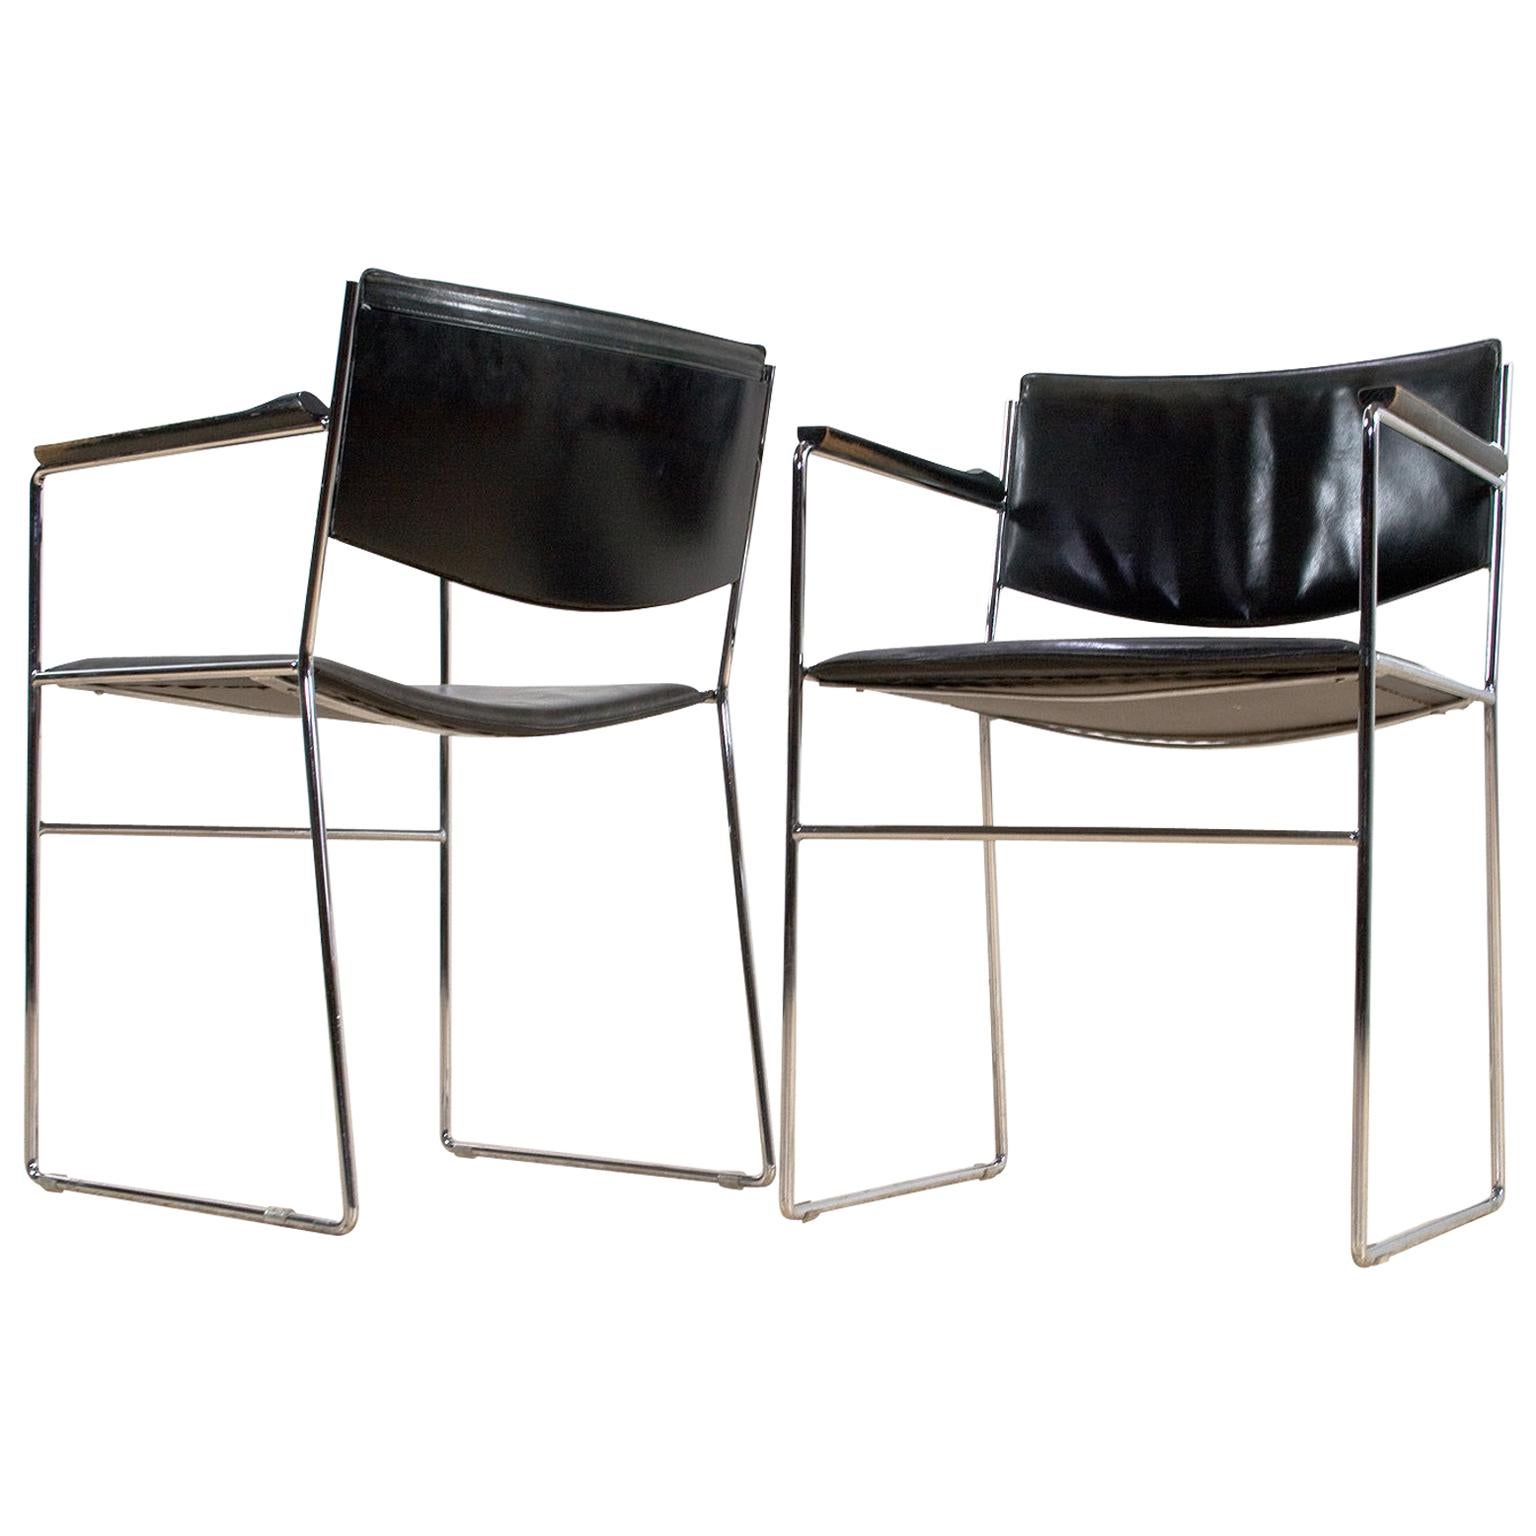 Italian Modern Dining Room Set in Black Leather and Chromed Steel, 1960s